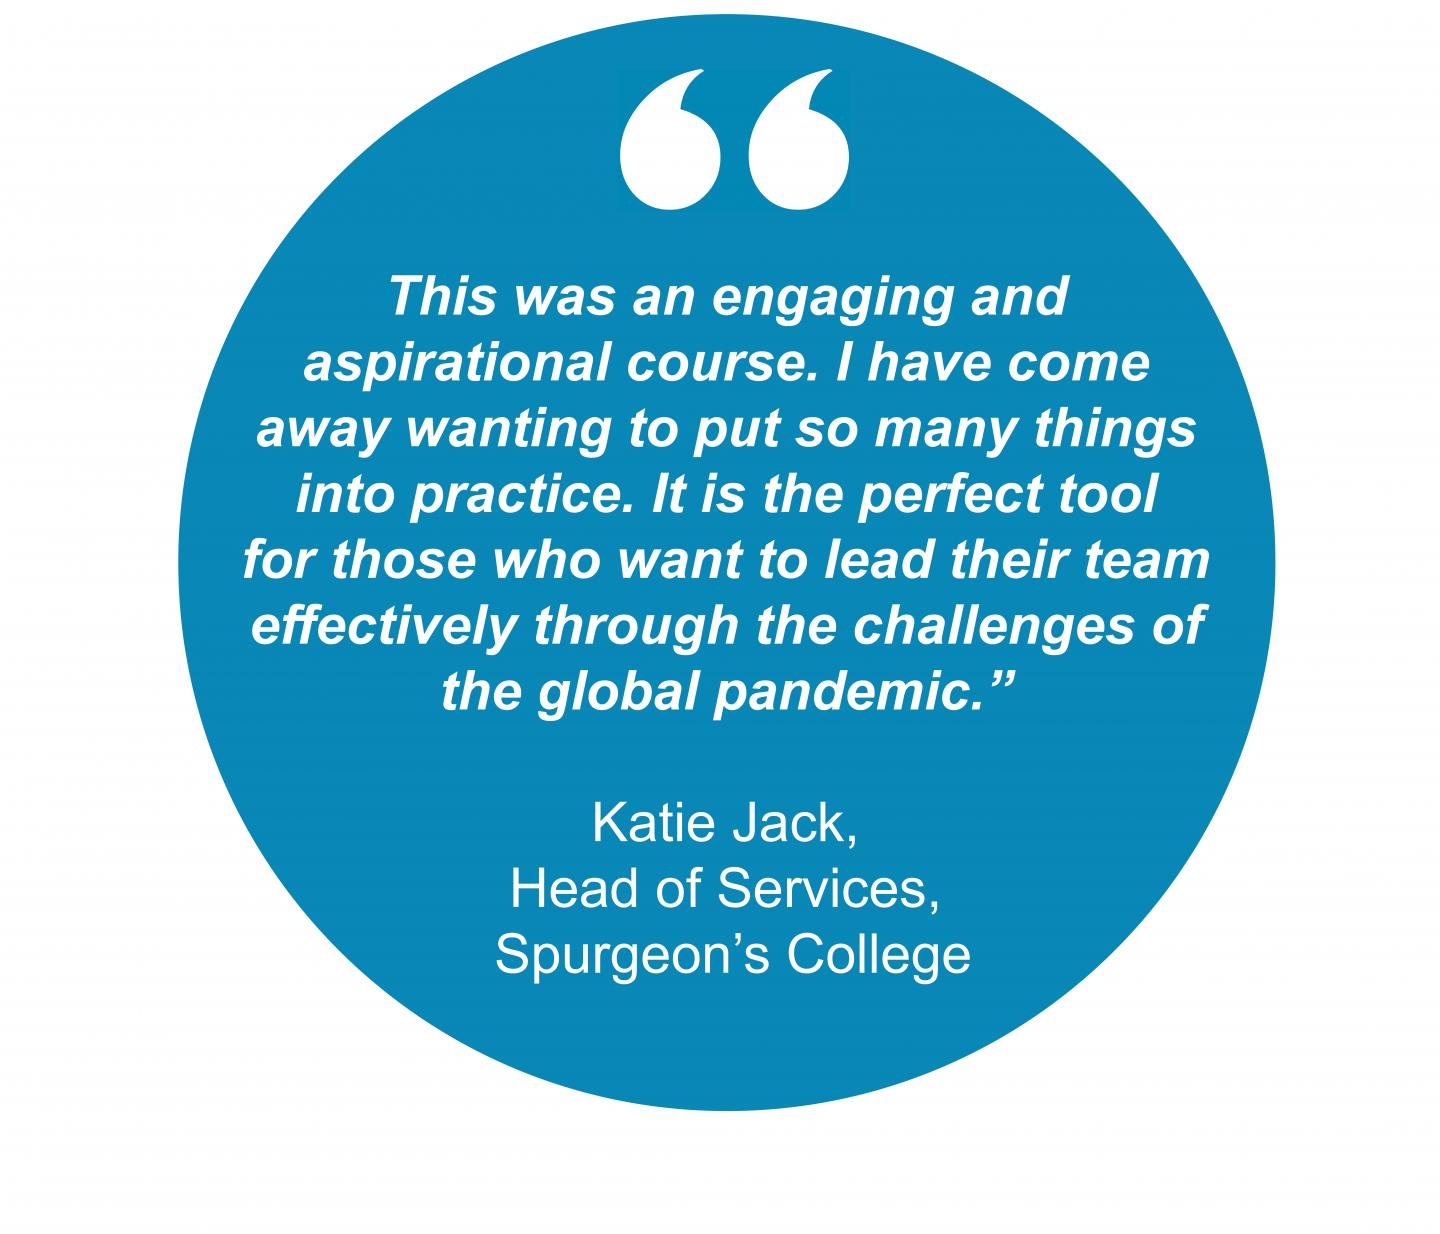 "This was an engaging and aspirational course. I have come away wanting to put so many things into practice. It is the perfect tool for those who want to lead their team effectively through the challenges of  the global pandemic.”  Katie Jack,  Head of Services,  Spurgeon’s College  